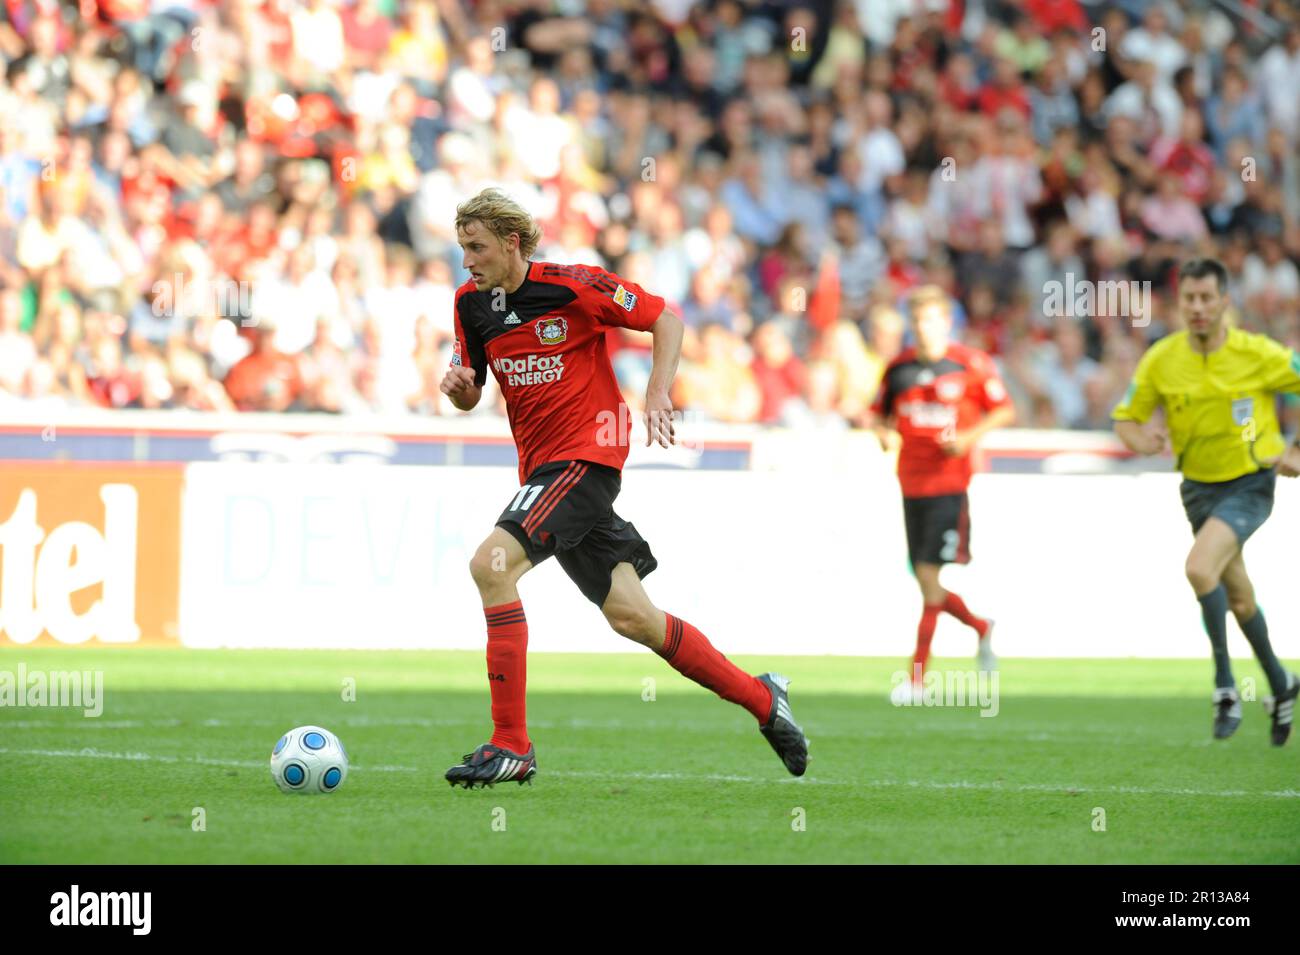 Stefan Kie§ling of the Bayer Leverkusen celebrates after scoring a News  Photo - Getty Images